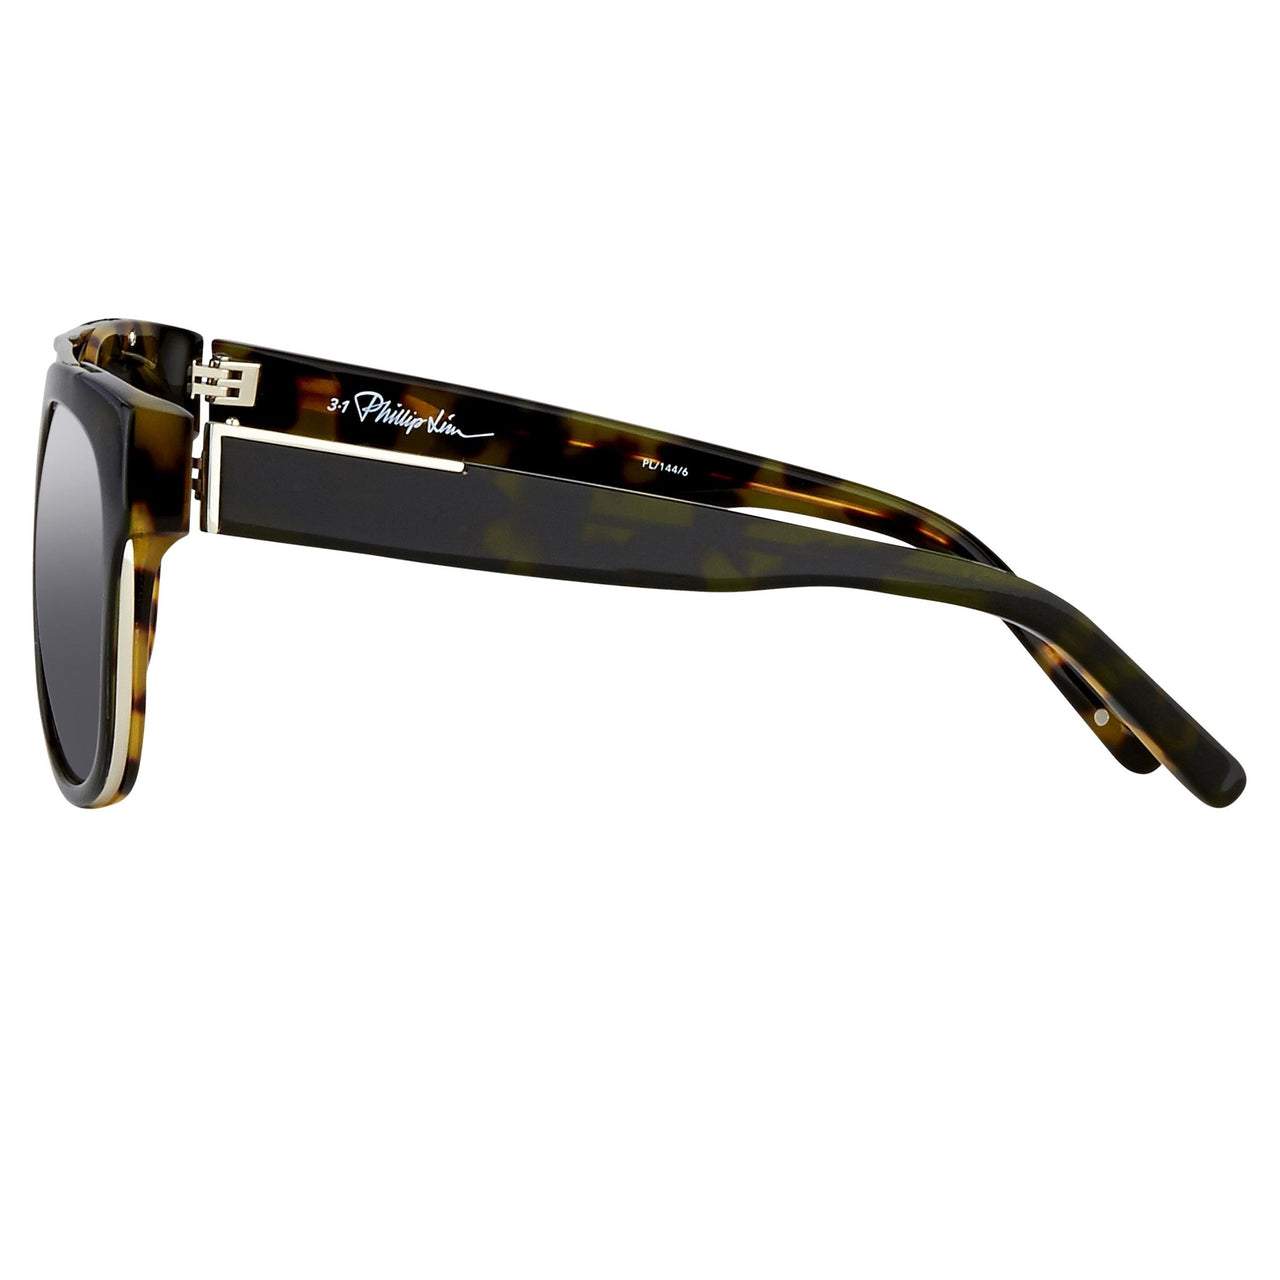 Phillip Lim Sunglasses with Rectangular Tortoiseshell Silver and Fog Green Lenses Category 3 - PL144C6SUN - Watches & Crystals